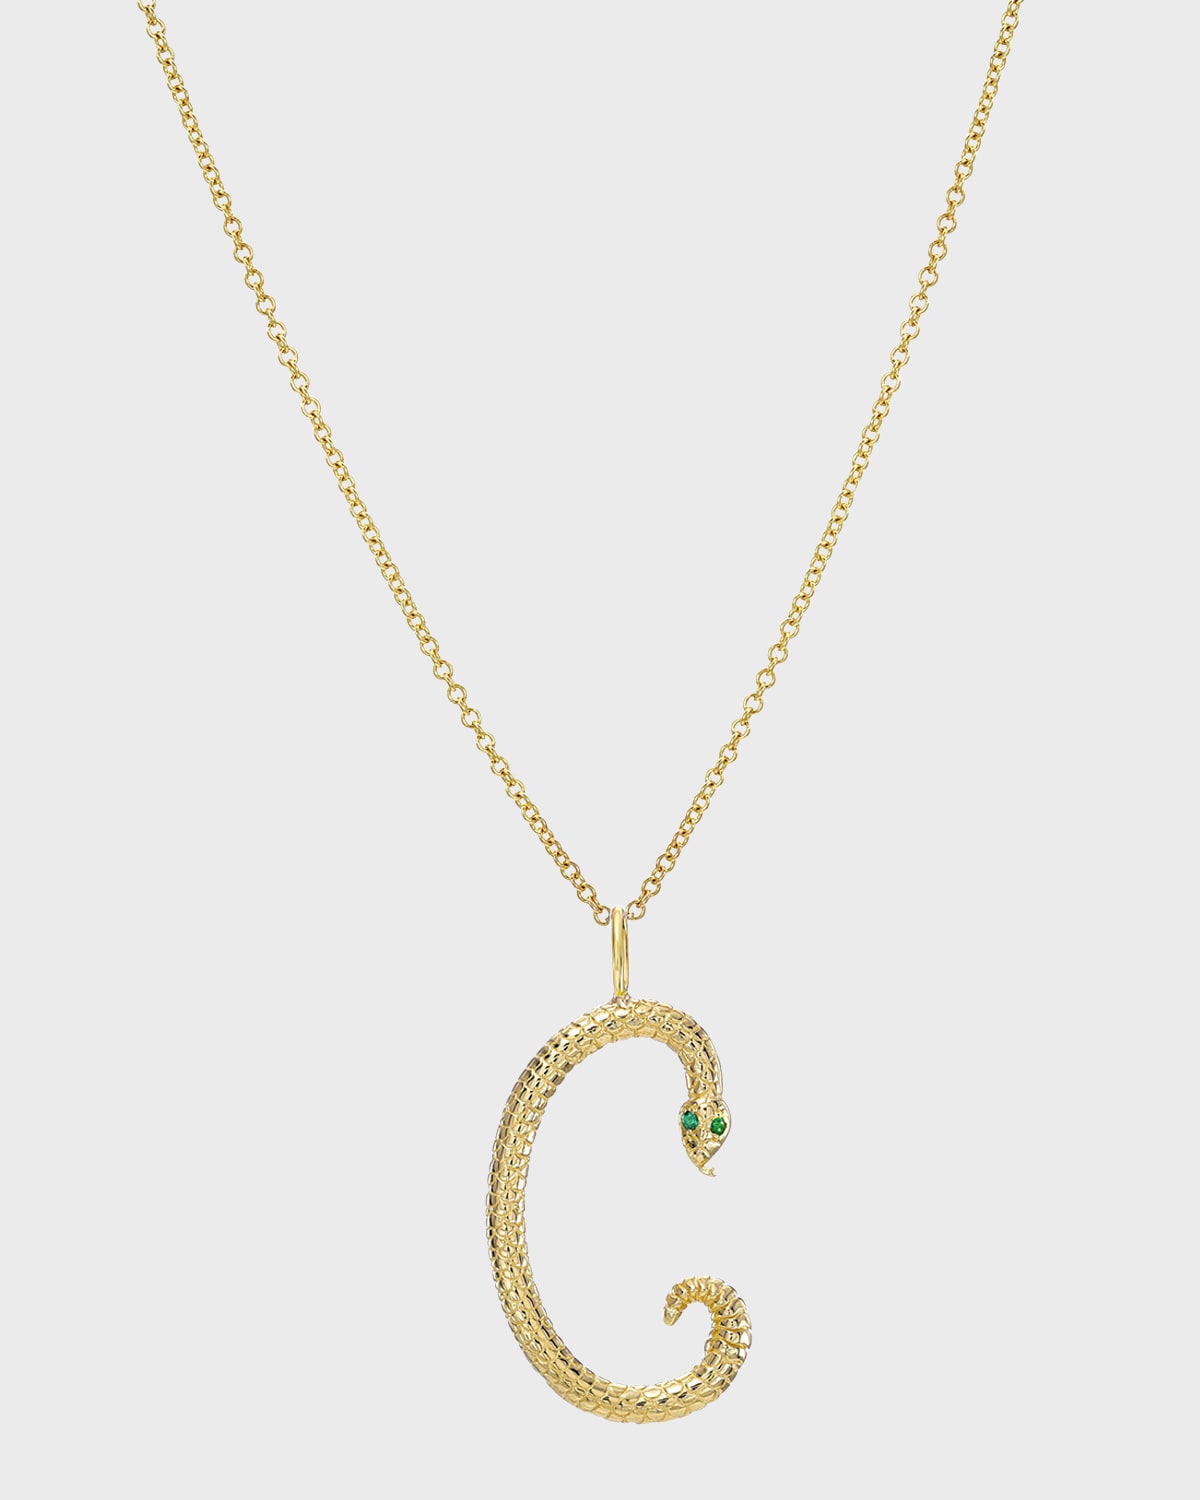 Zoe Lev Jewelry 14k Gold Snake Initial Necklace In C